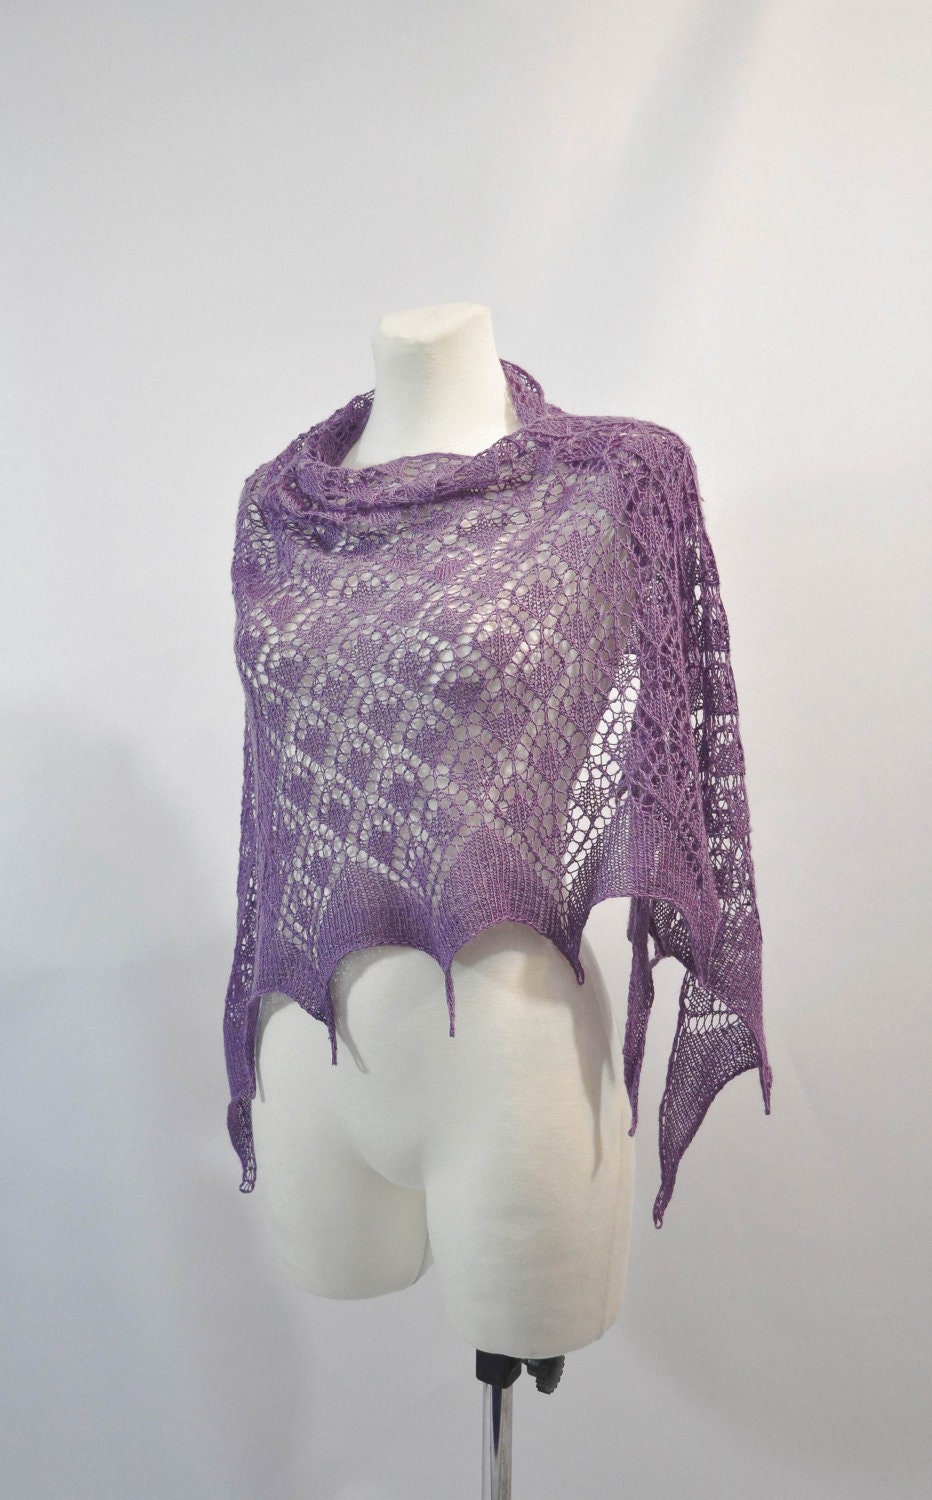 Heather hand knitted lace shawl, stole, scarf, - aboutCRAFTS